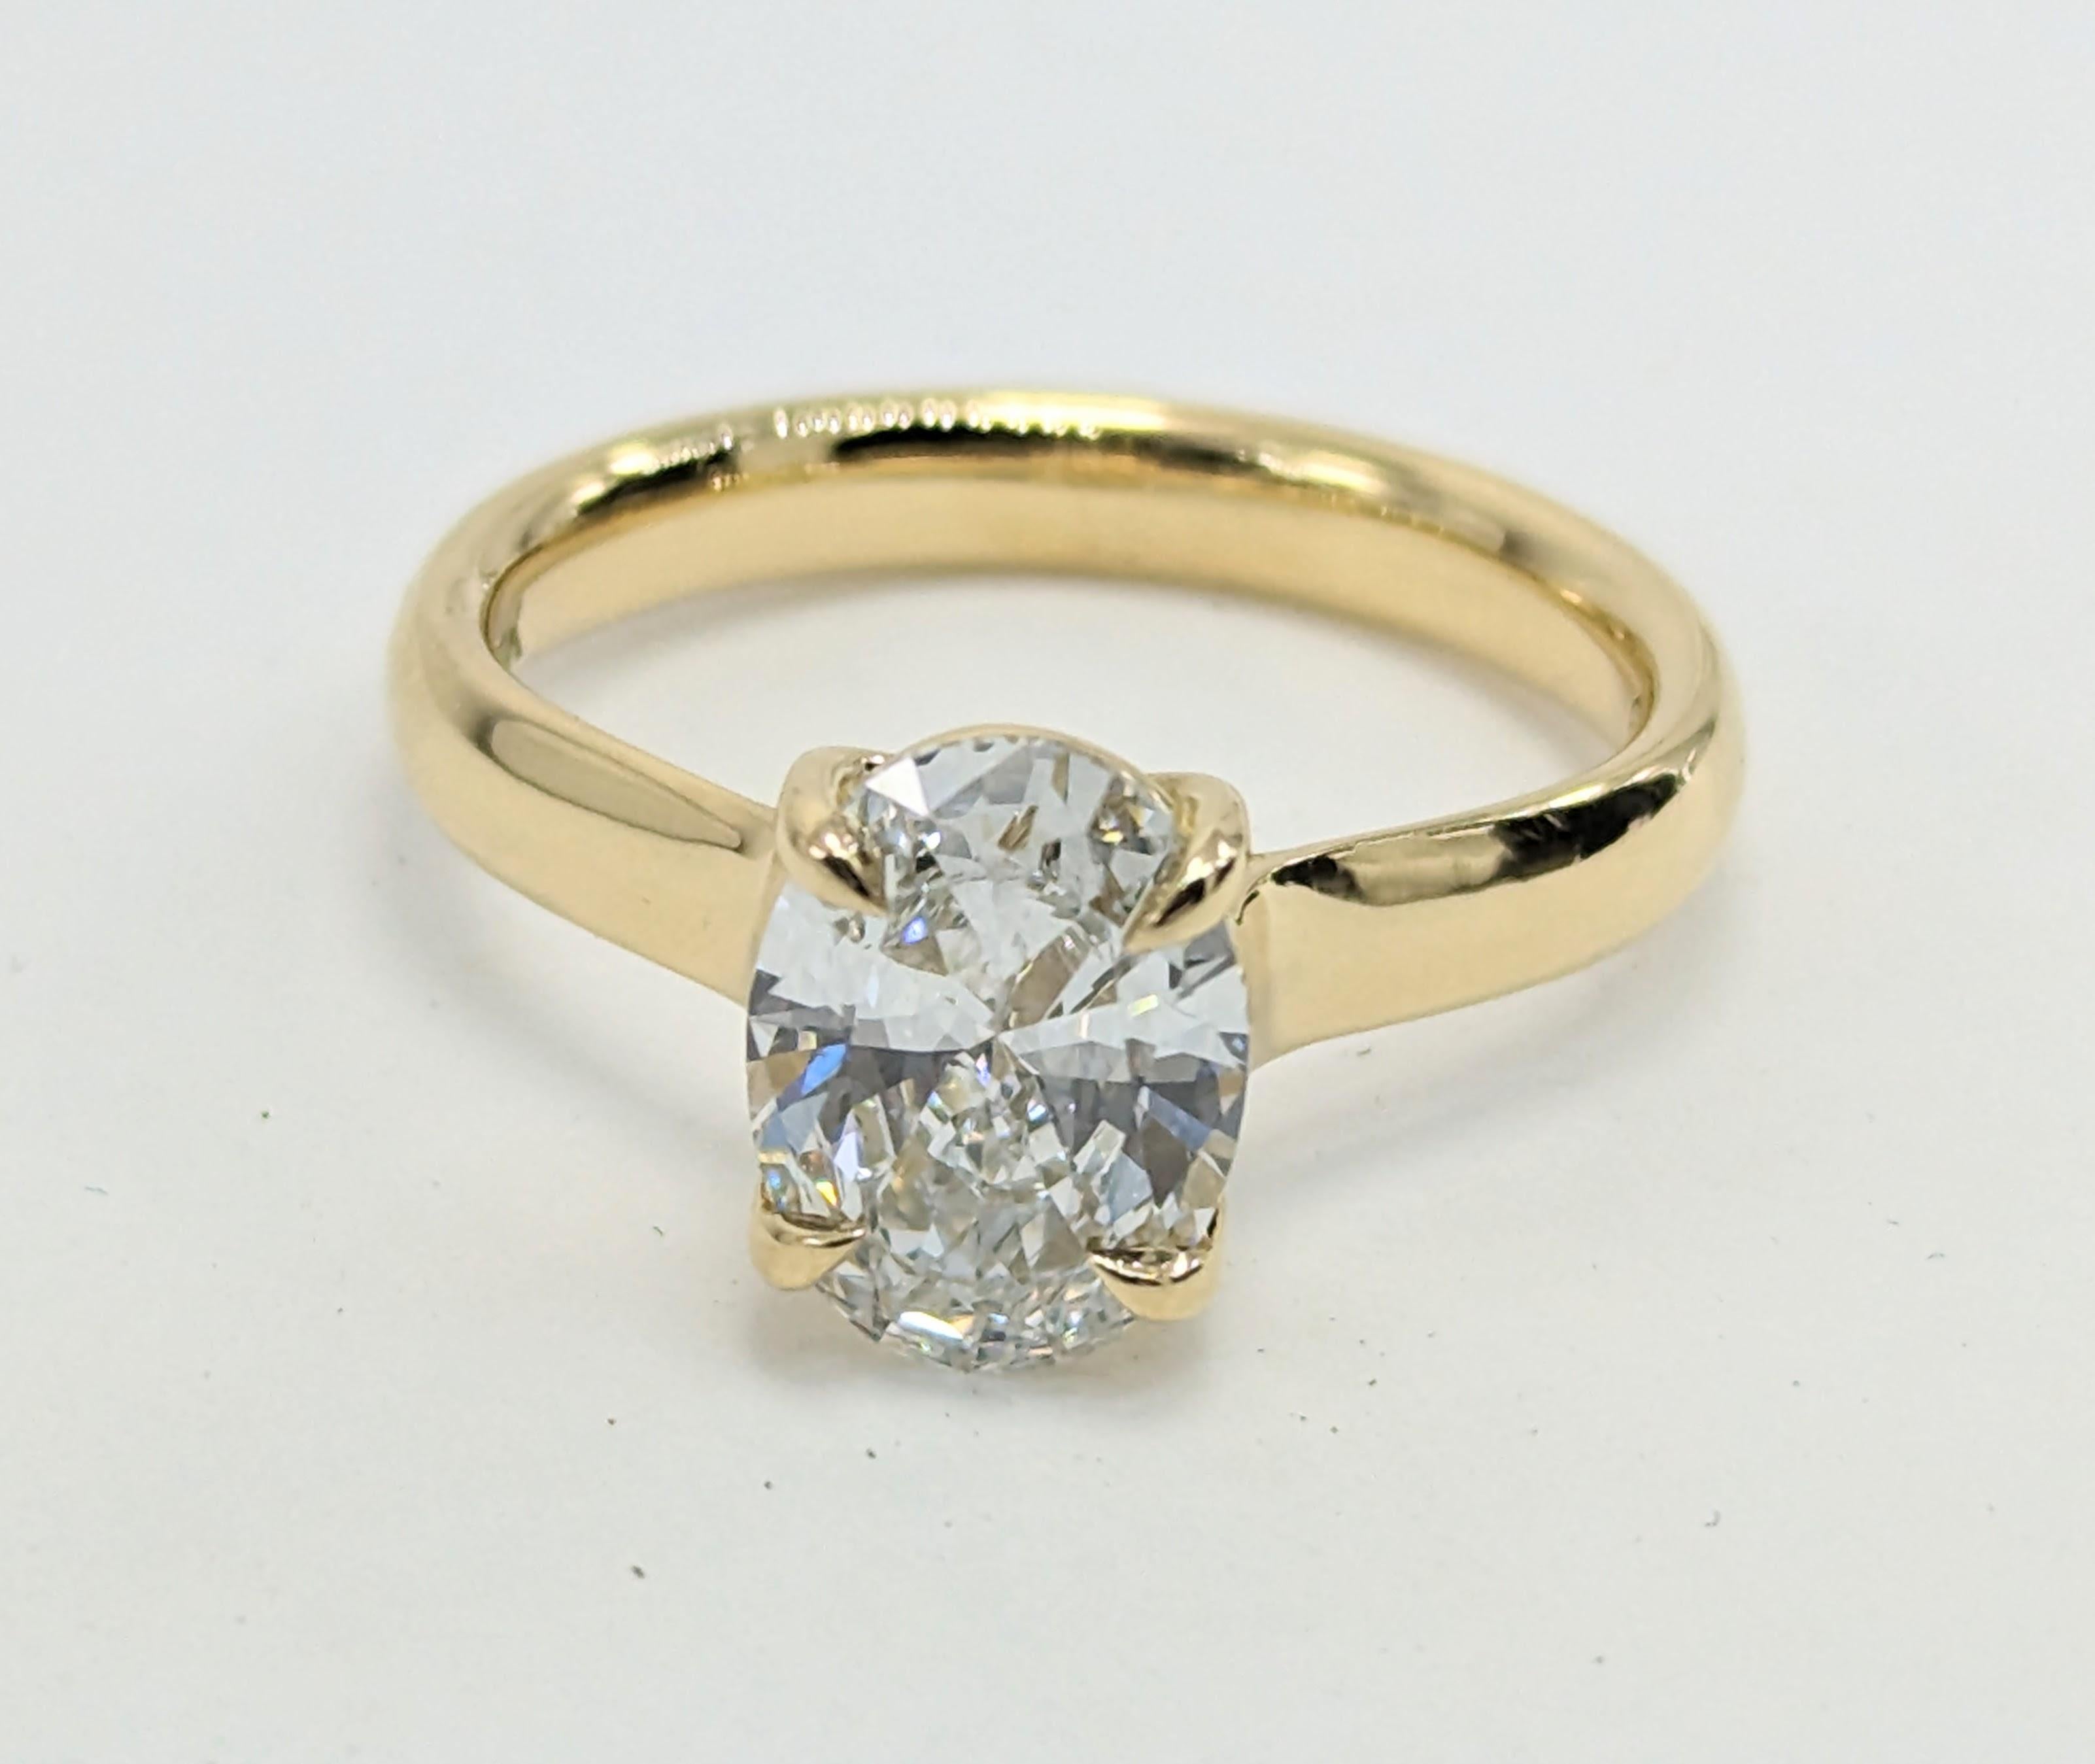 For Sale:  GIA 1.51 Certified Diamond  Engagement Ring in 18 Karat Gold 4